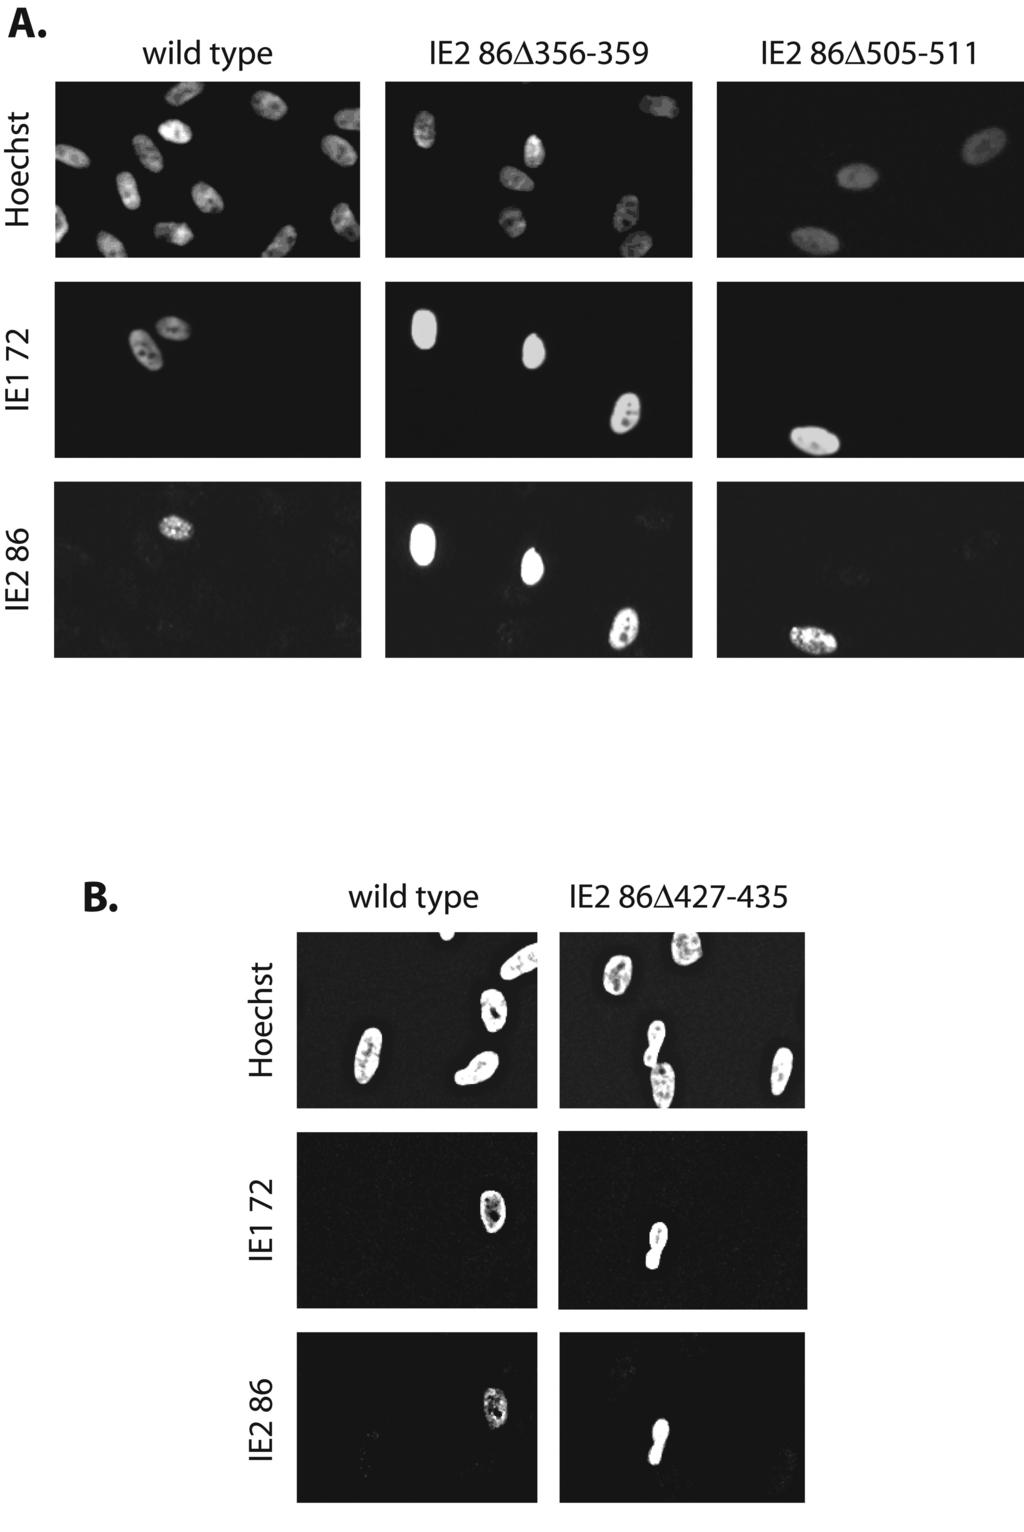 VOL. 78, 2004 CHARACTERIZATION OF NONVIABLE HCMV IE2 MUTANTS 1823 FIG. 3. IE1 72 and IE2 86 expression in wild-type- and IE2 86 mutant BAC-electroporated cells at 1 day postelectroporation.